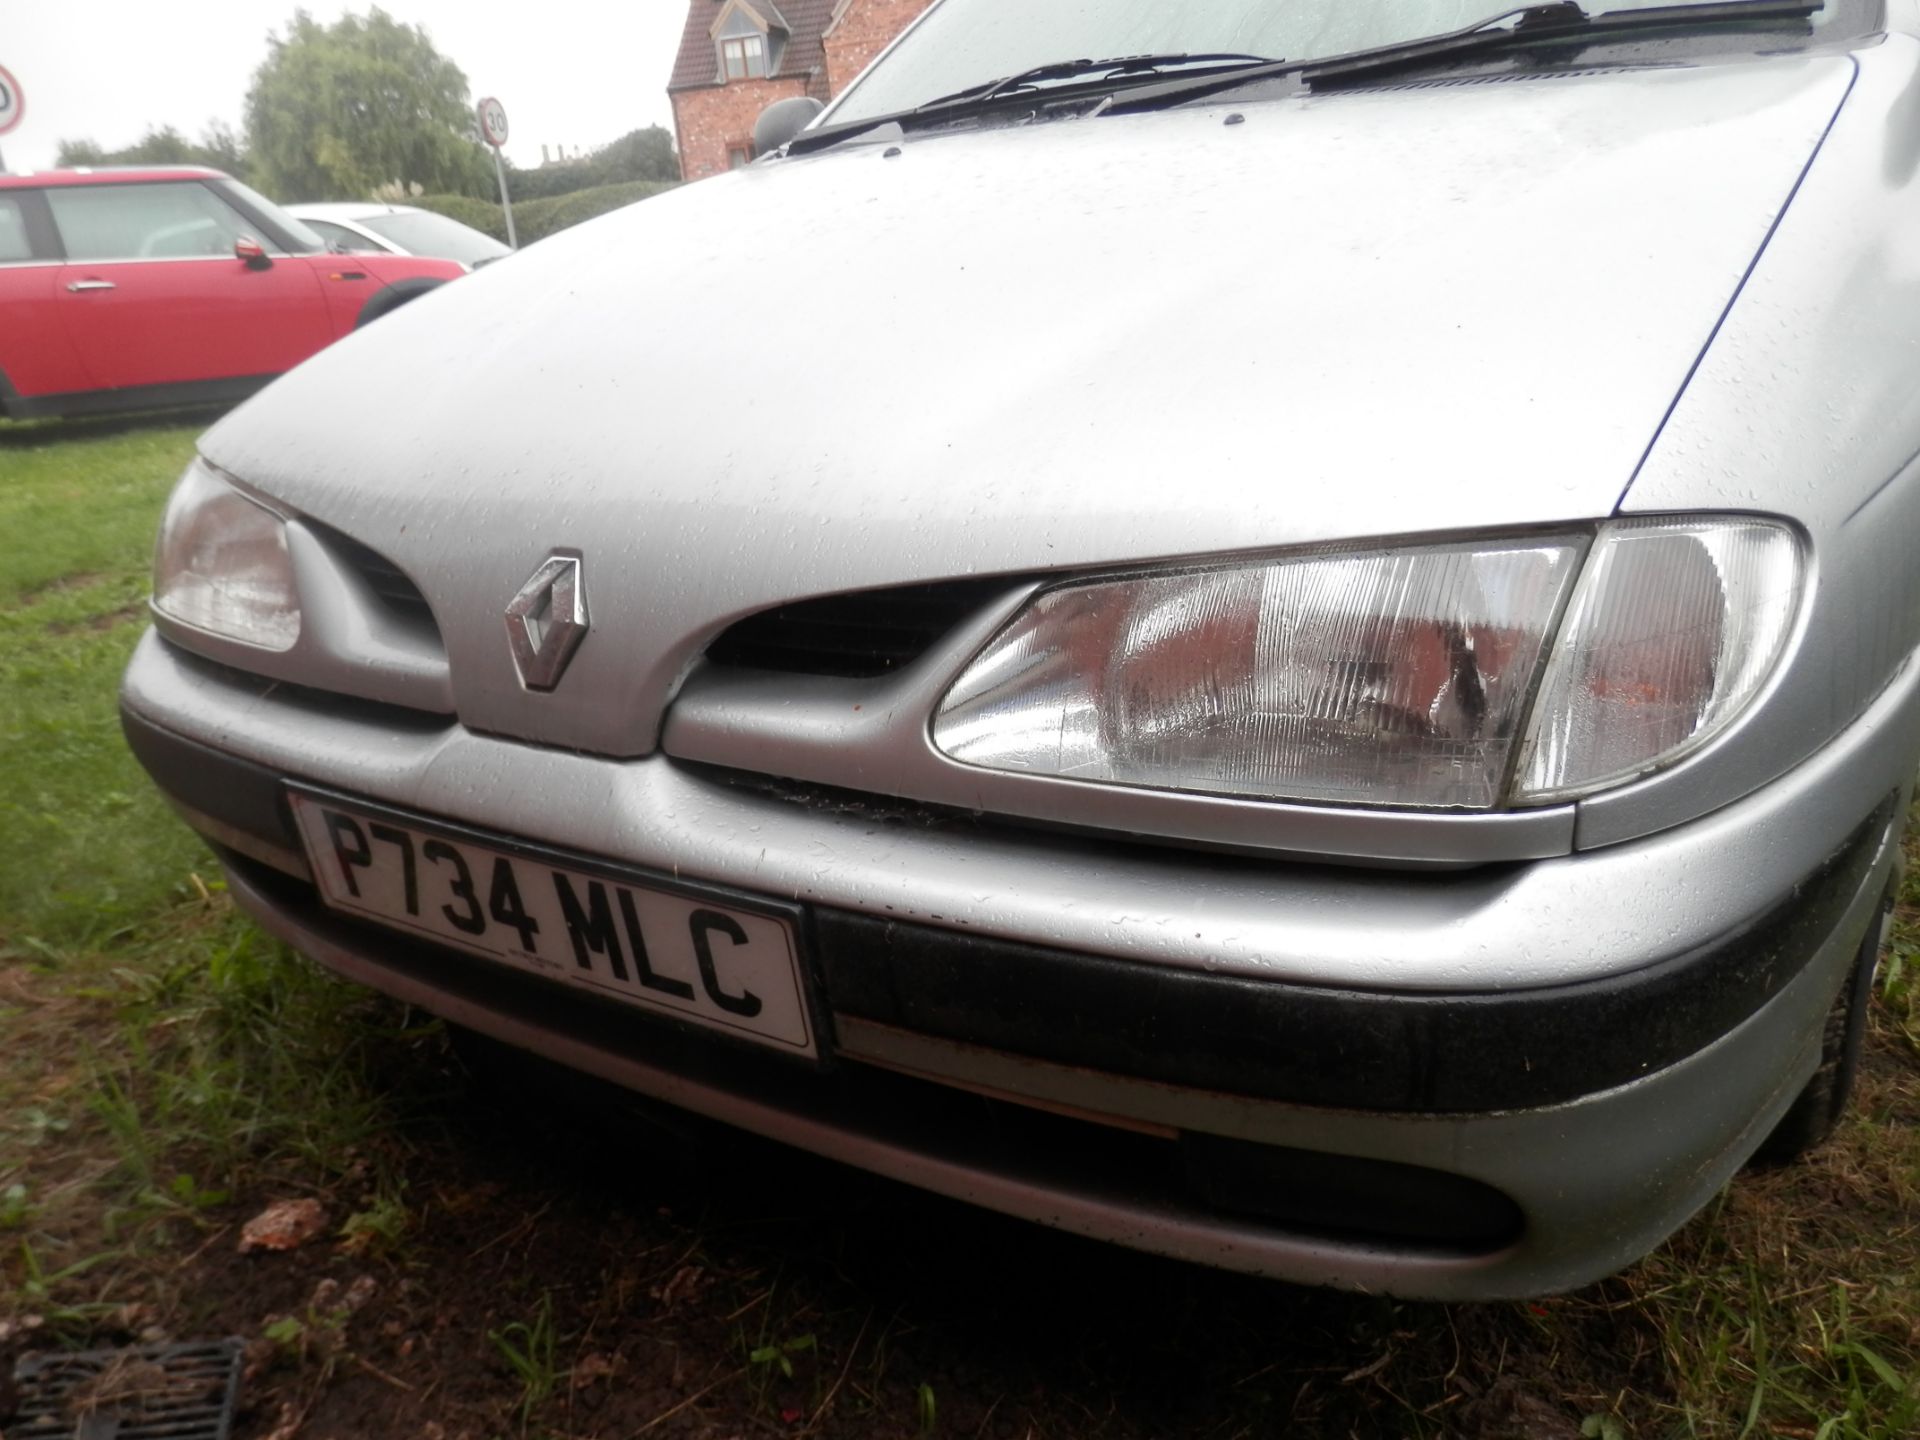 1996/P REG RENAULT MEGANE 1.6 PETROL, PX TRADE IN, WILL NOT START. TOO GOOD TO SCRAP !! NO RESERVE ! - Image 3 of 15